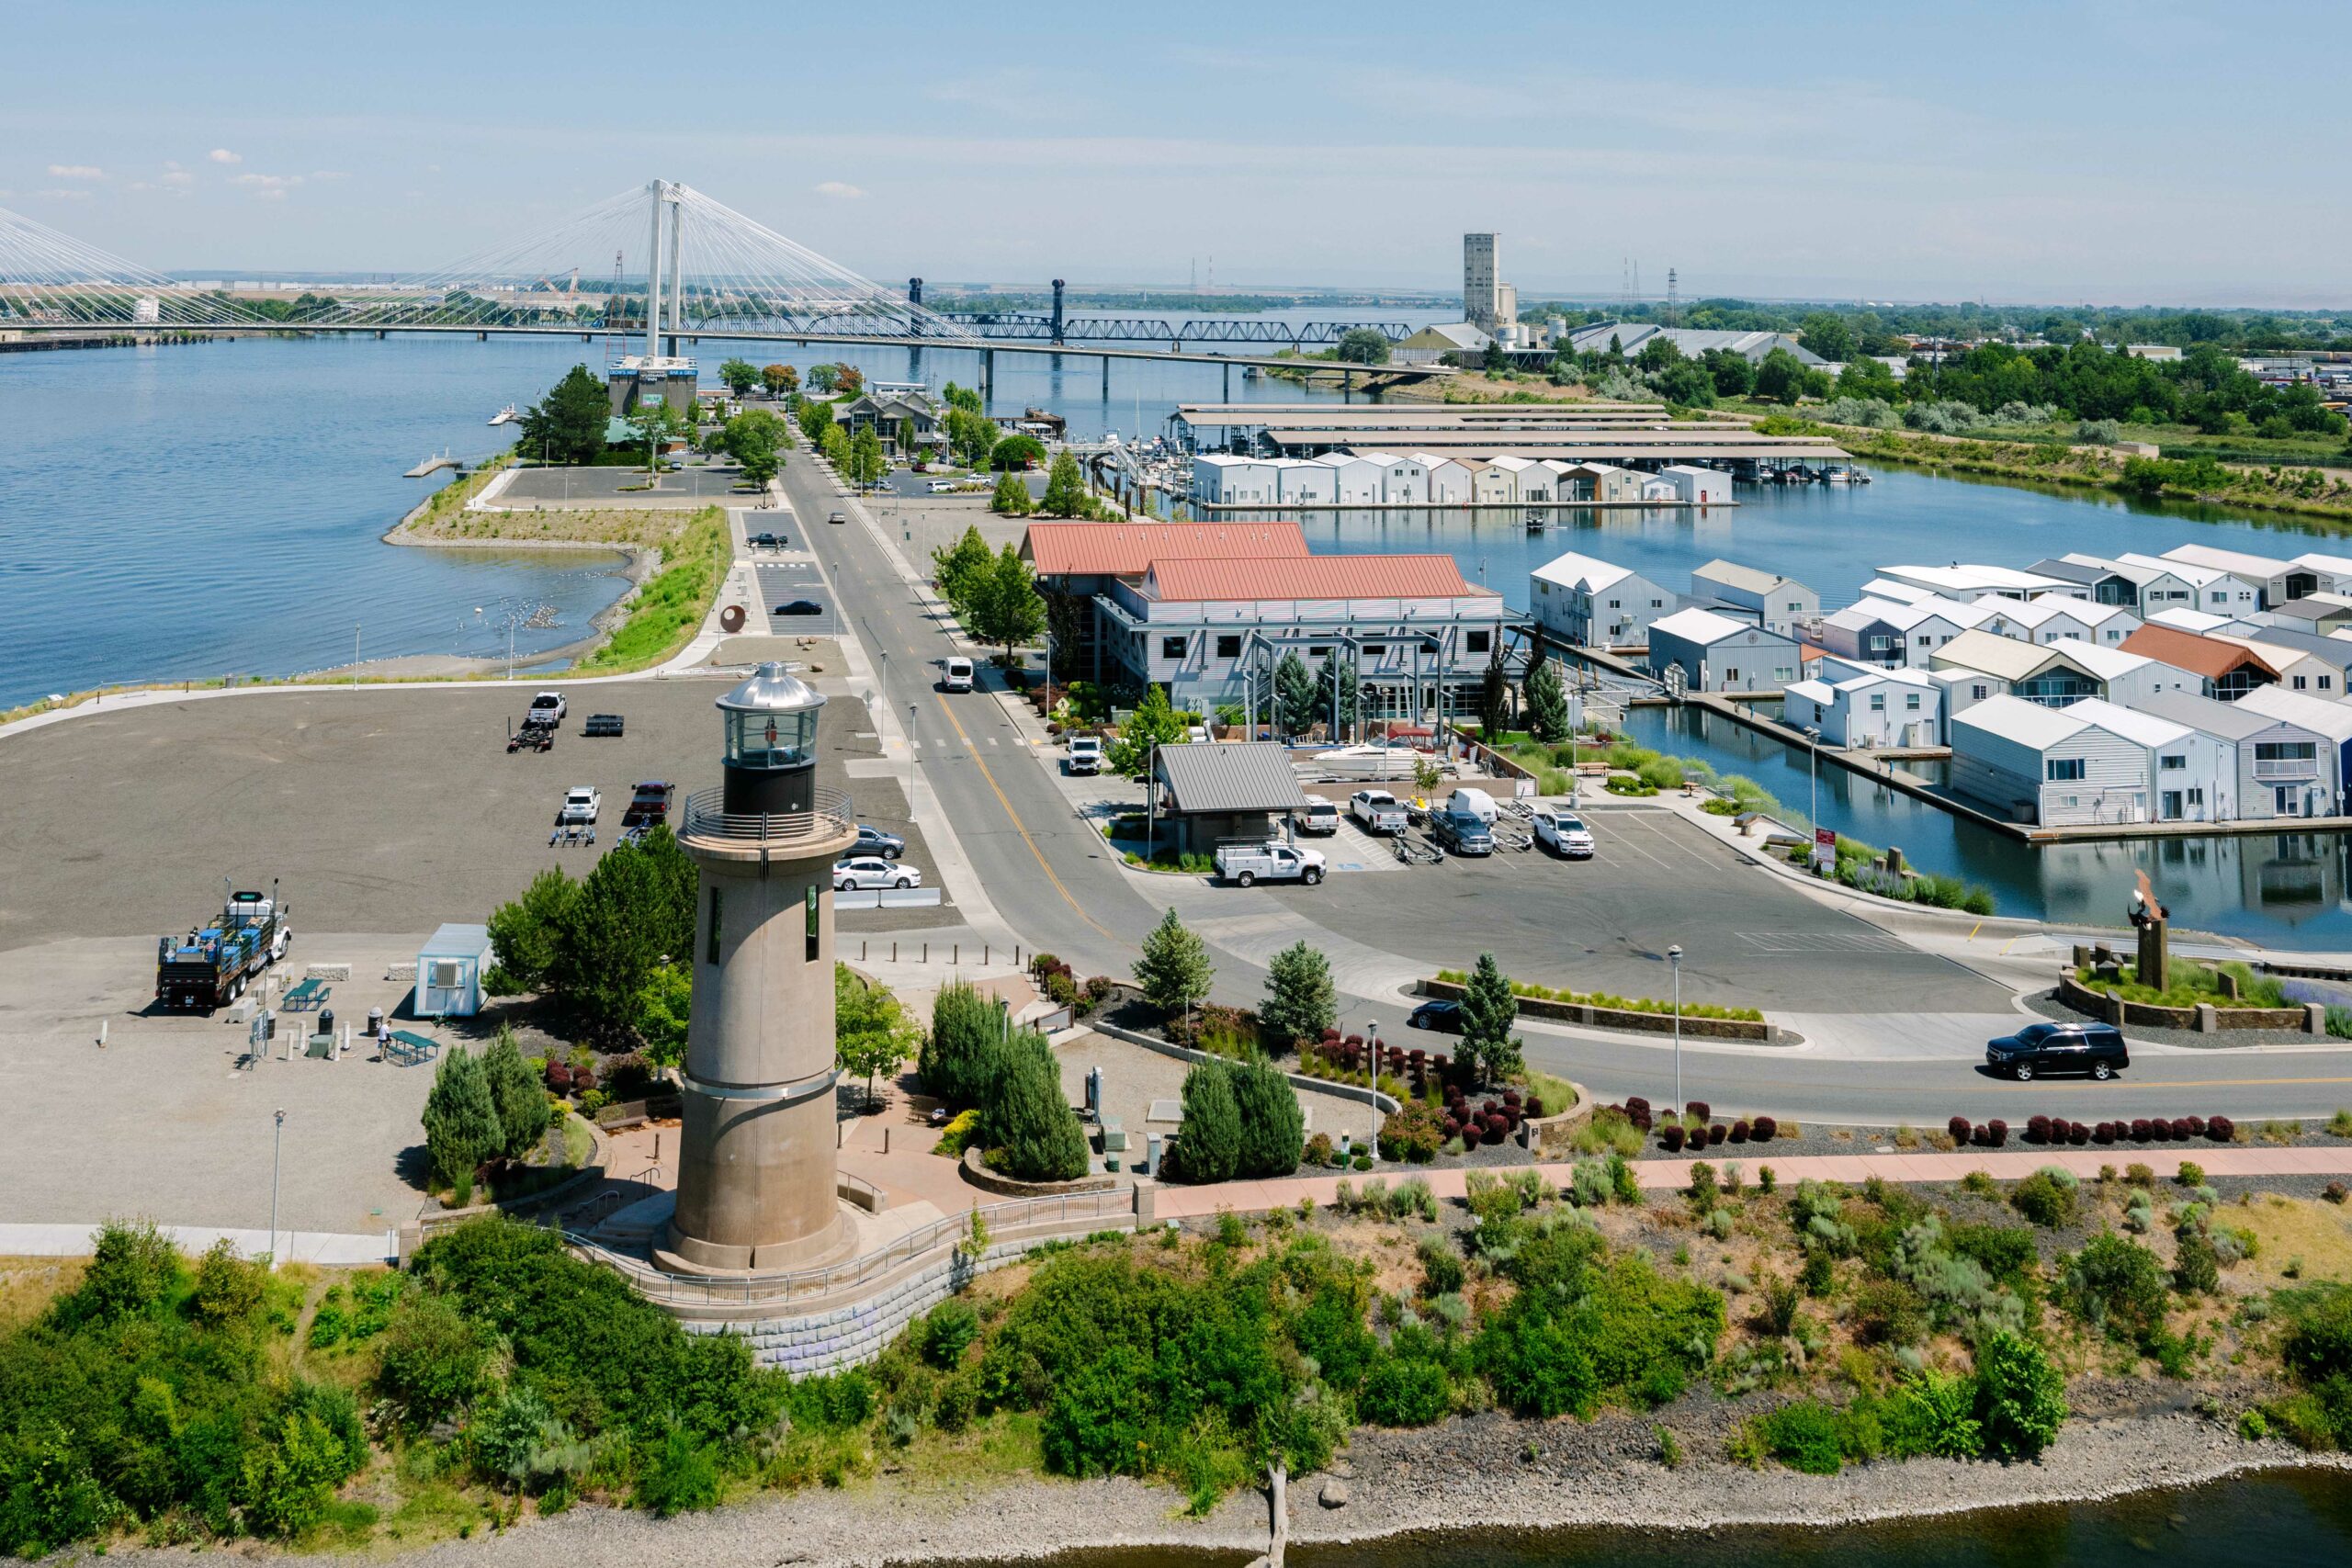 Aerial of Clover Island with the lighthouse and Lighthouse Plaza in the foreground.